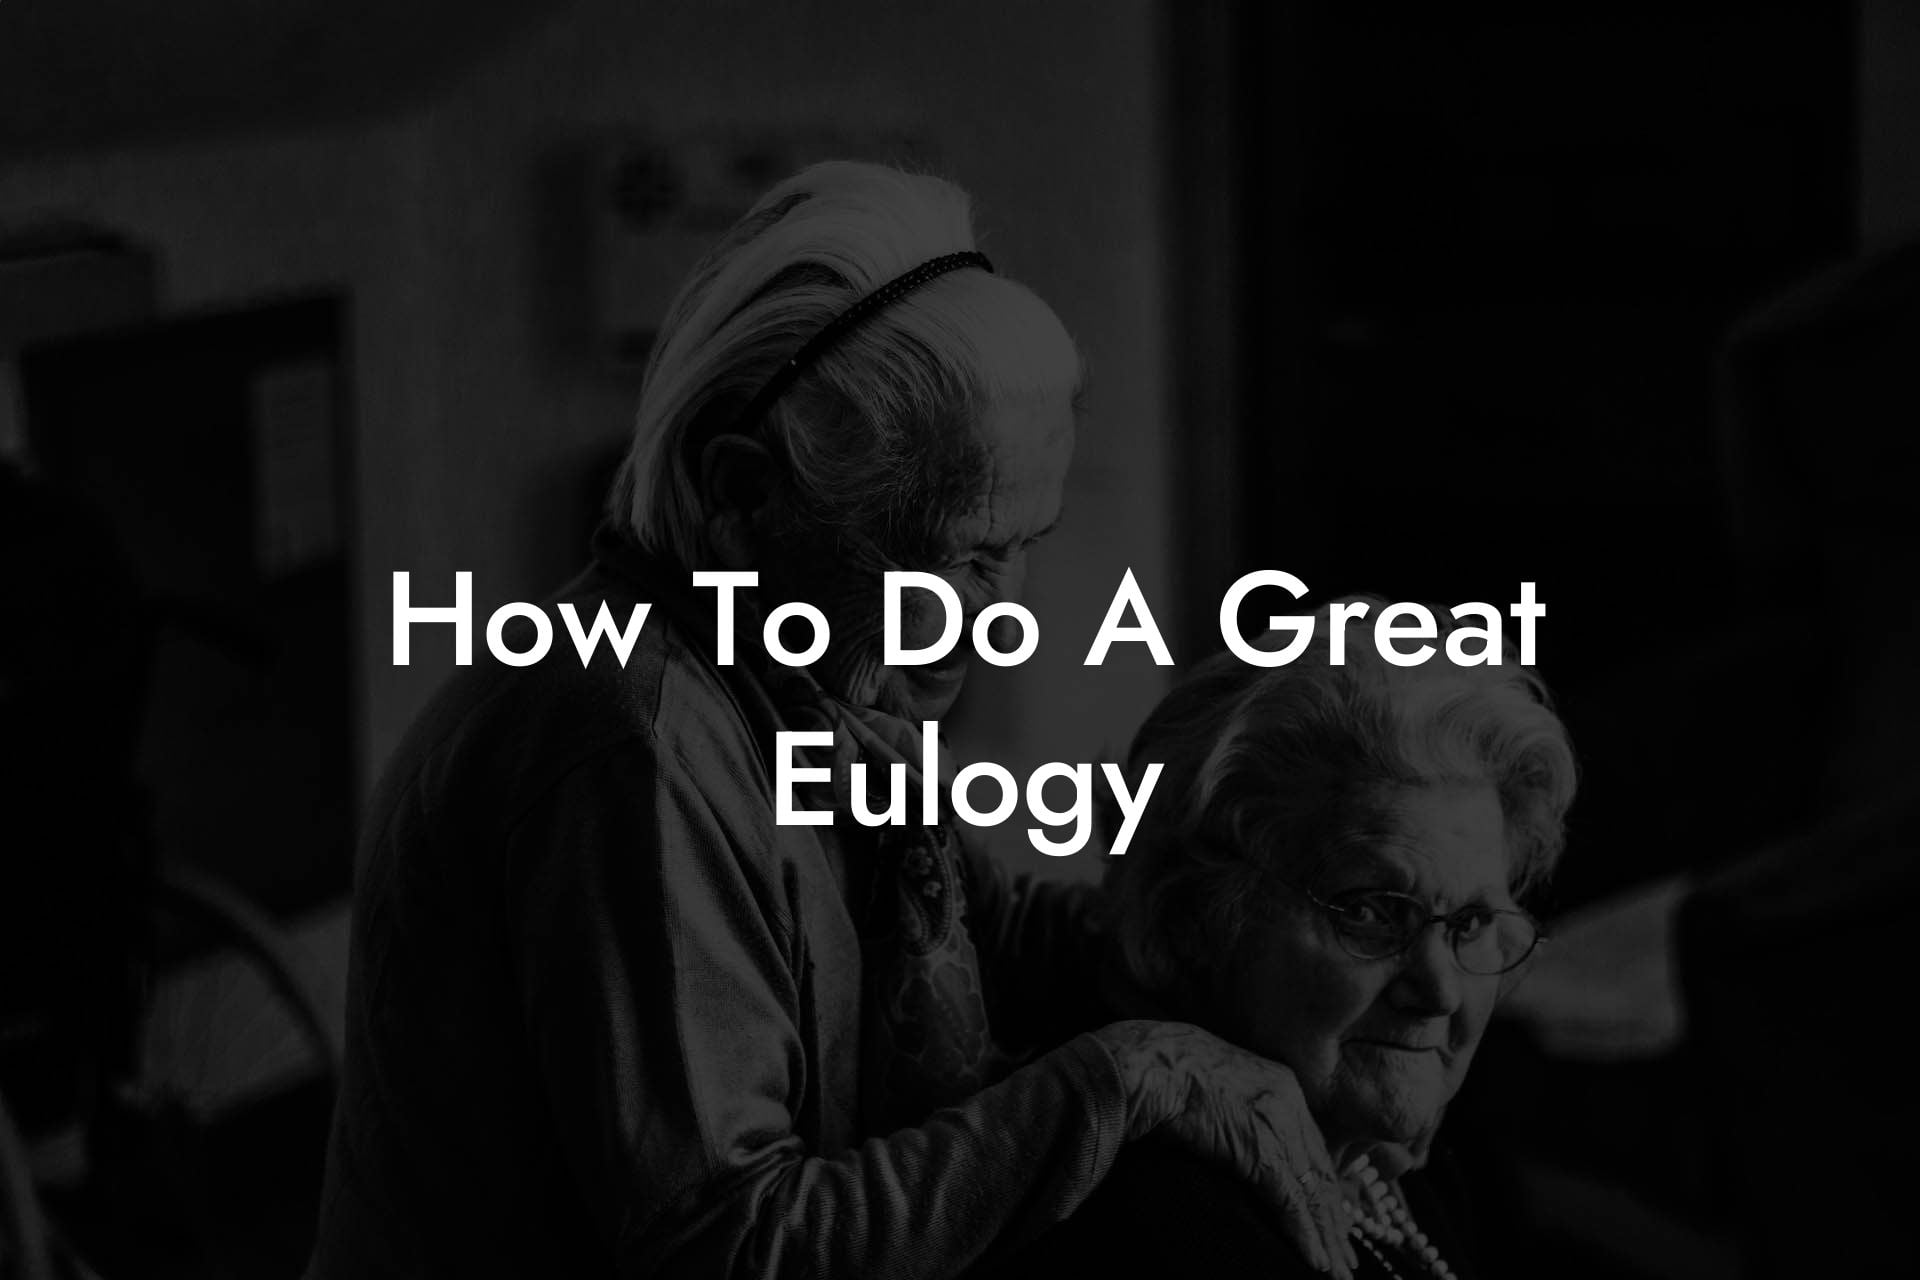 How To Do A Great Eulogy